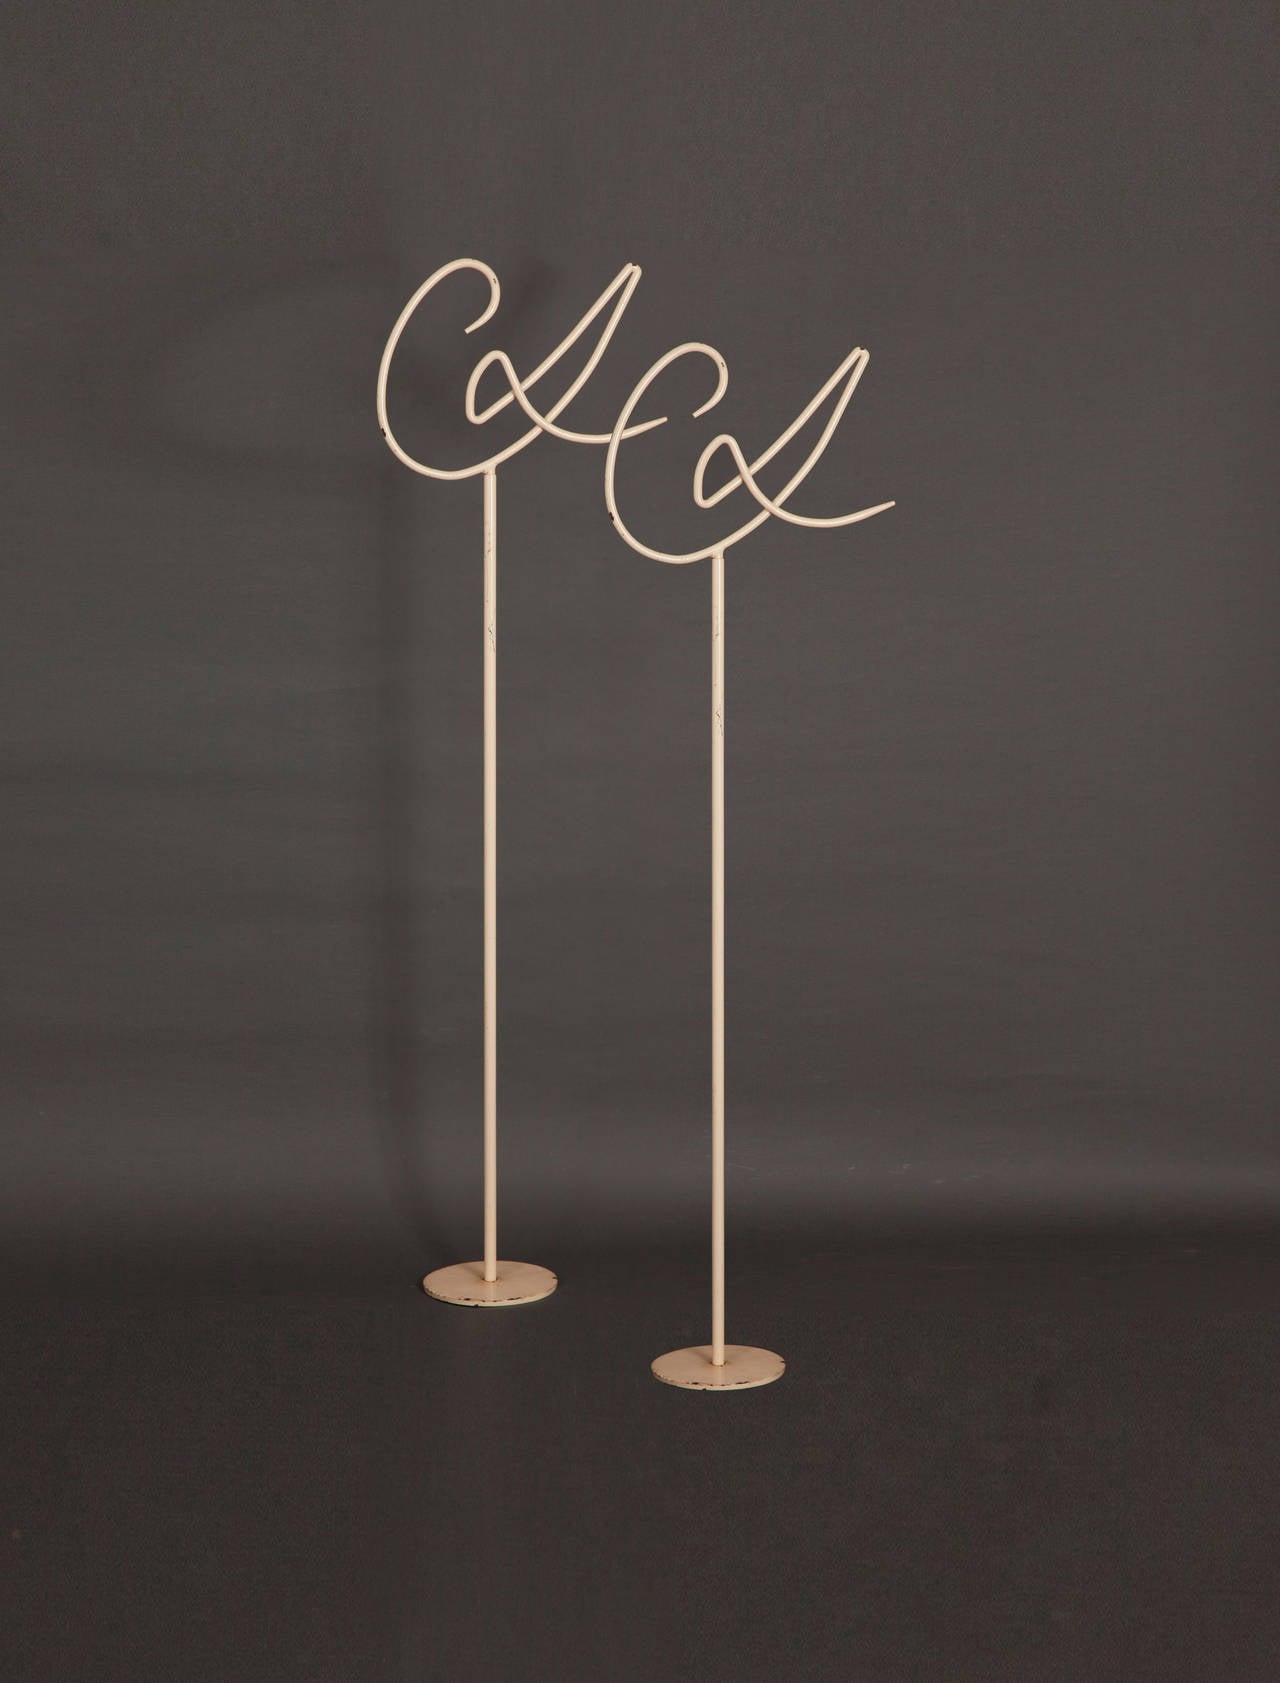 A pair of bent and enameled tubular steel display stands made expressly for fashion designer, Christian Lacroix, each comprising three individual components: a solid, round base, an upright, and a top sculpted as LaCroix's cursive 'CL' logo.

We